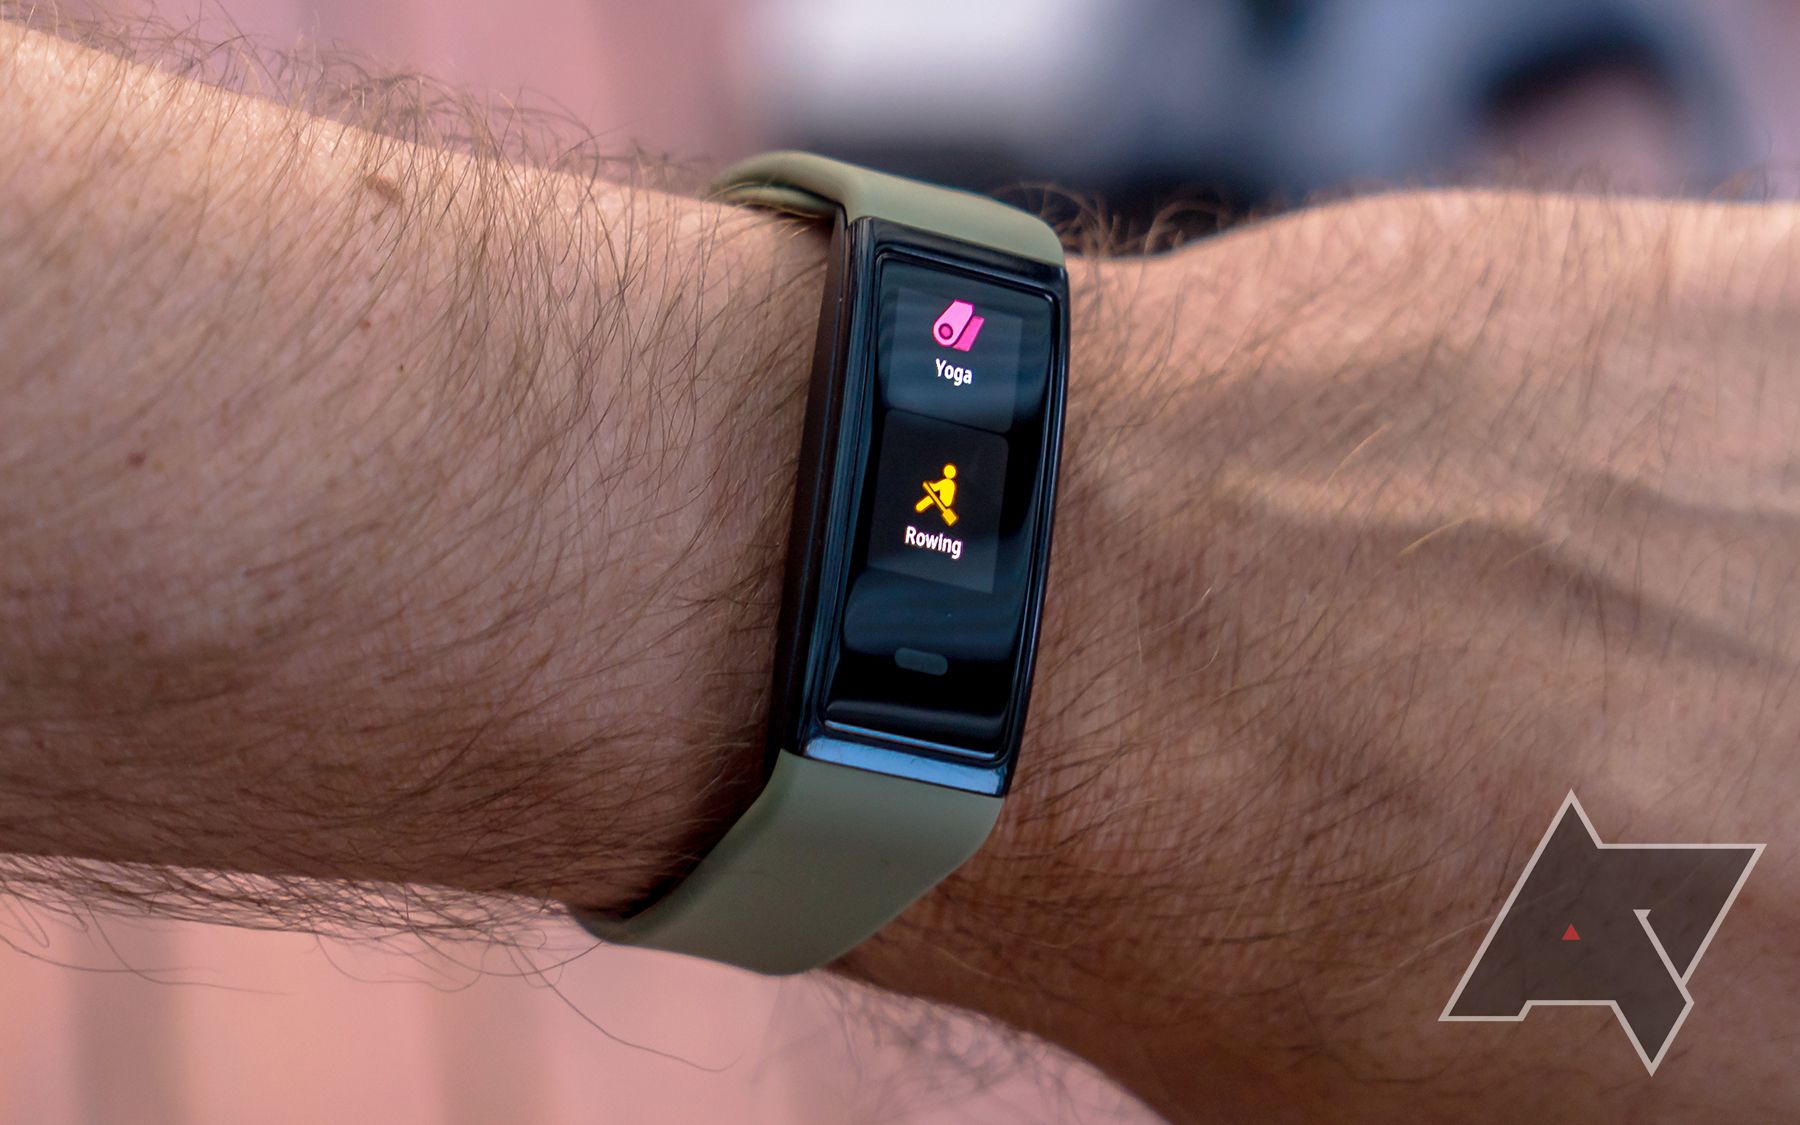 Halo View fitness tracker: Everything we know about it